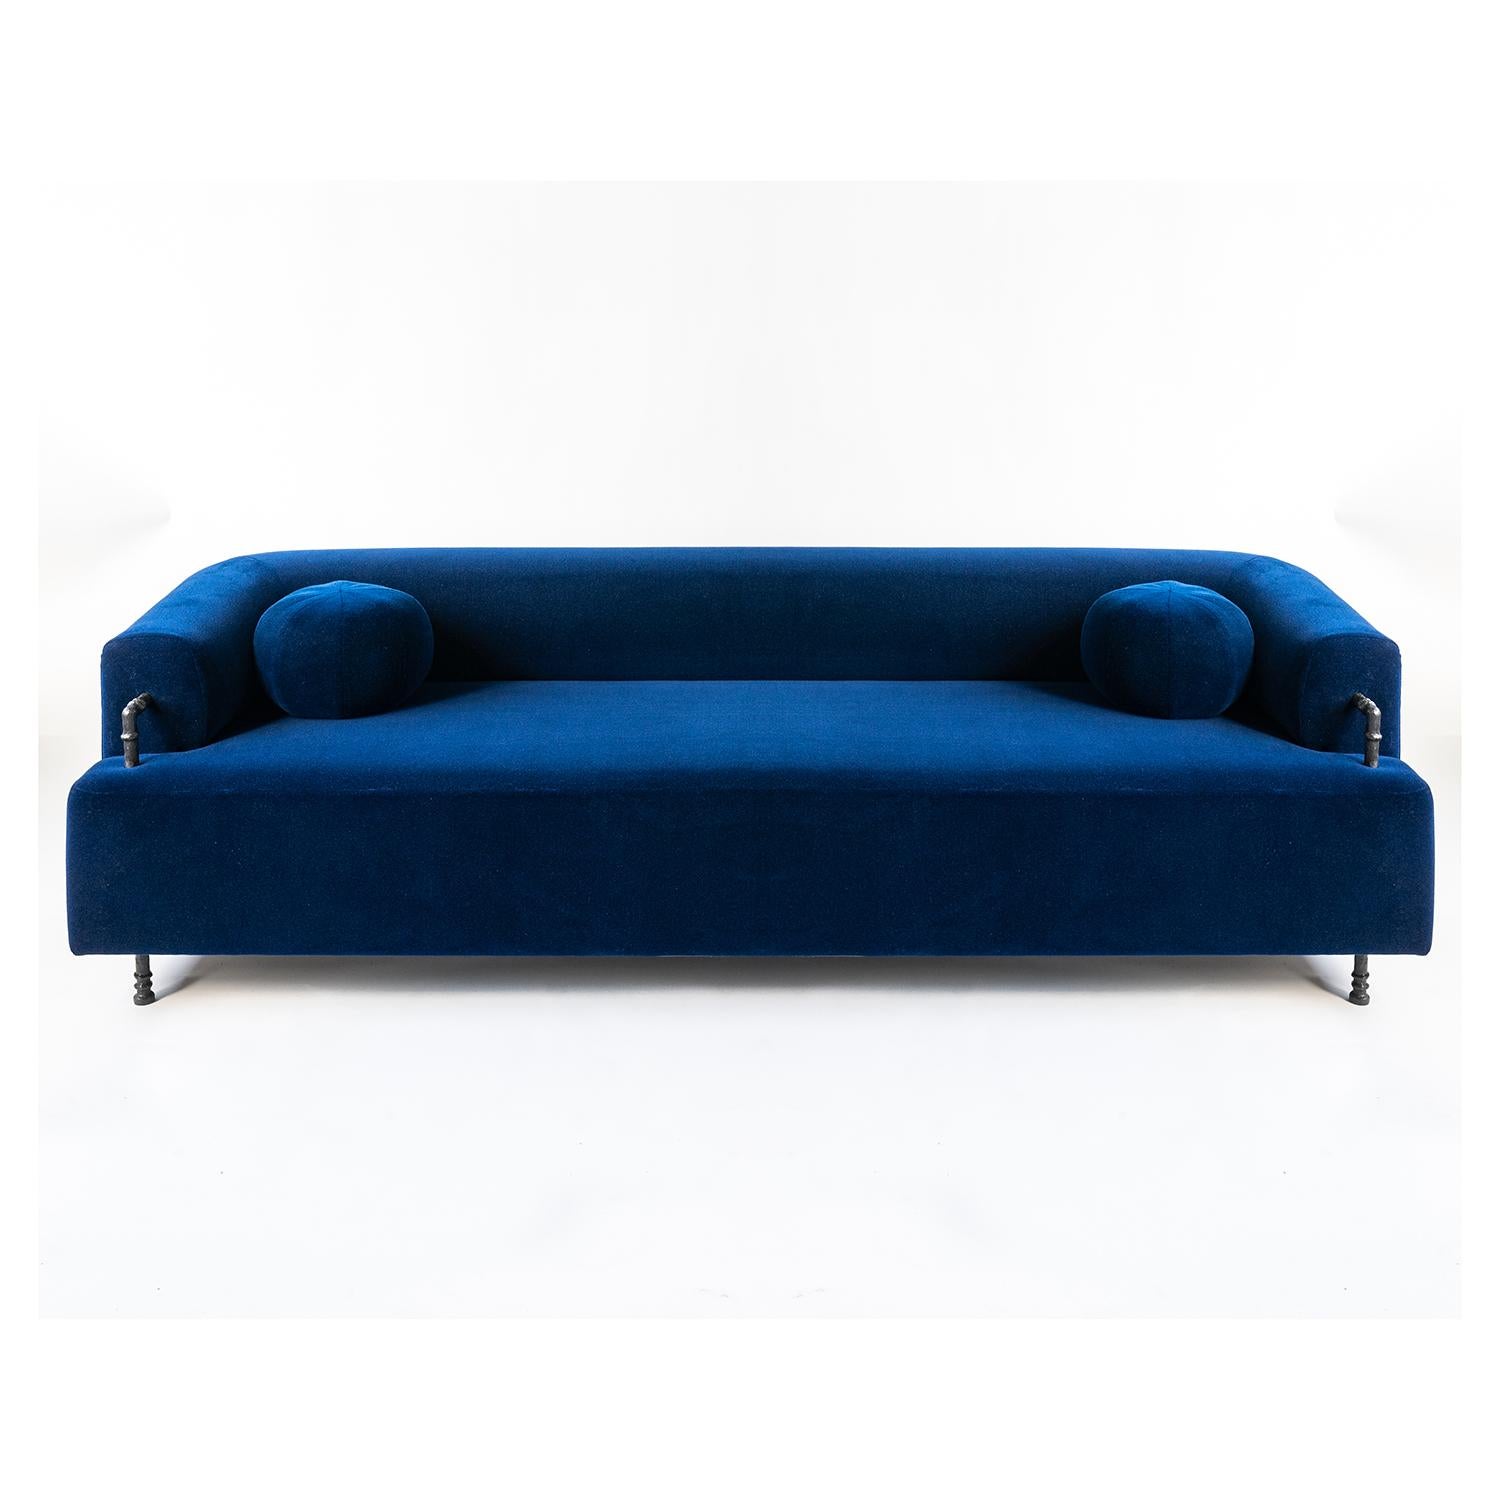 SOFA NO. 2
J.M. Szymanski
d. 2020

Our signature hand-carved steel elements add an edge to the softness of the mohair fabric.
Pricing may vary on filling. Pricing based on COM.

Custom sizes and fabrics available

Our products are